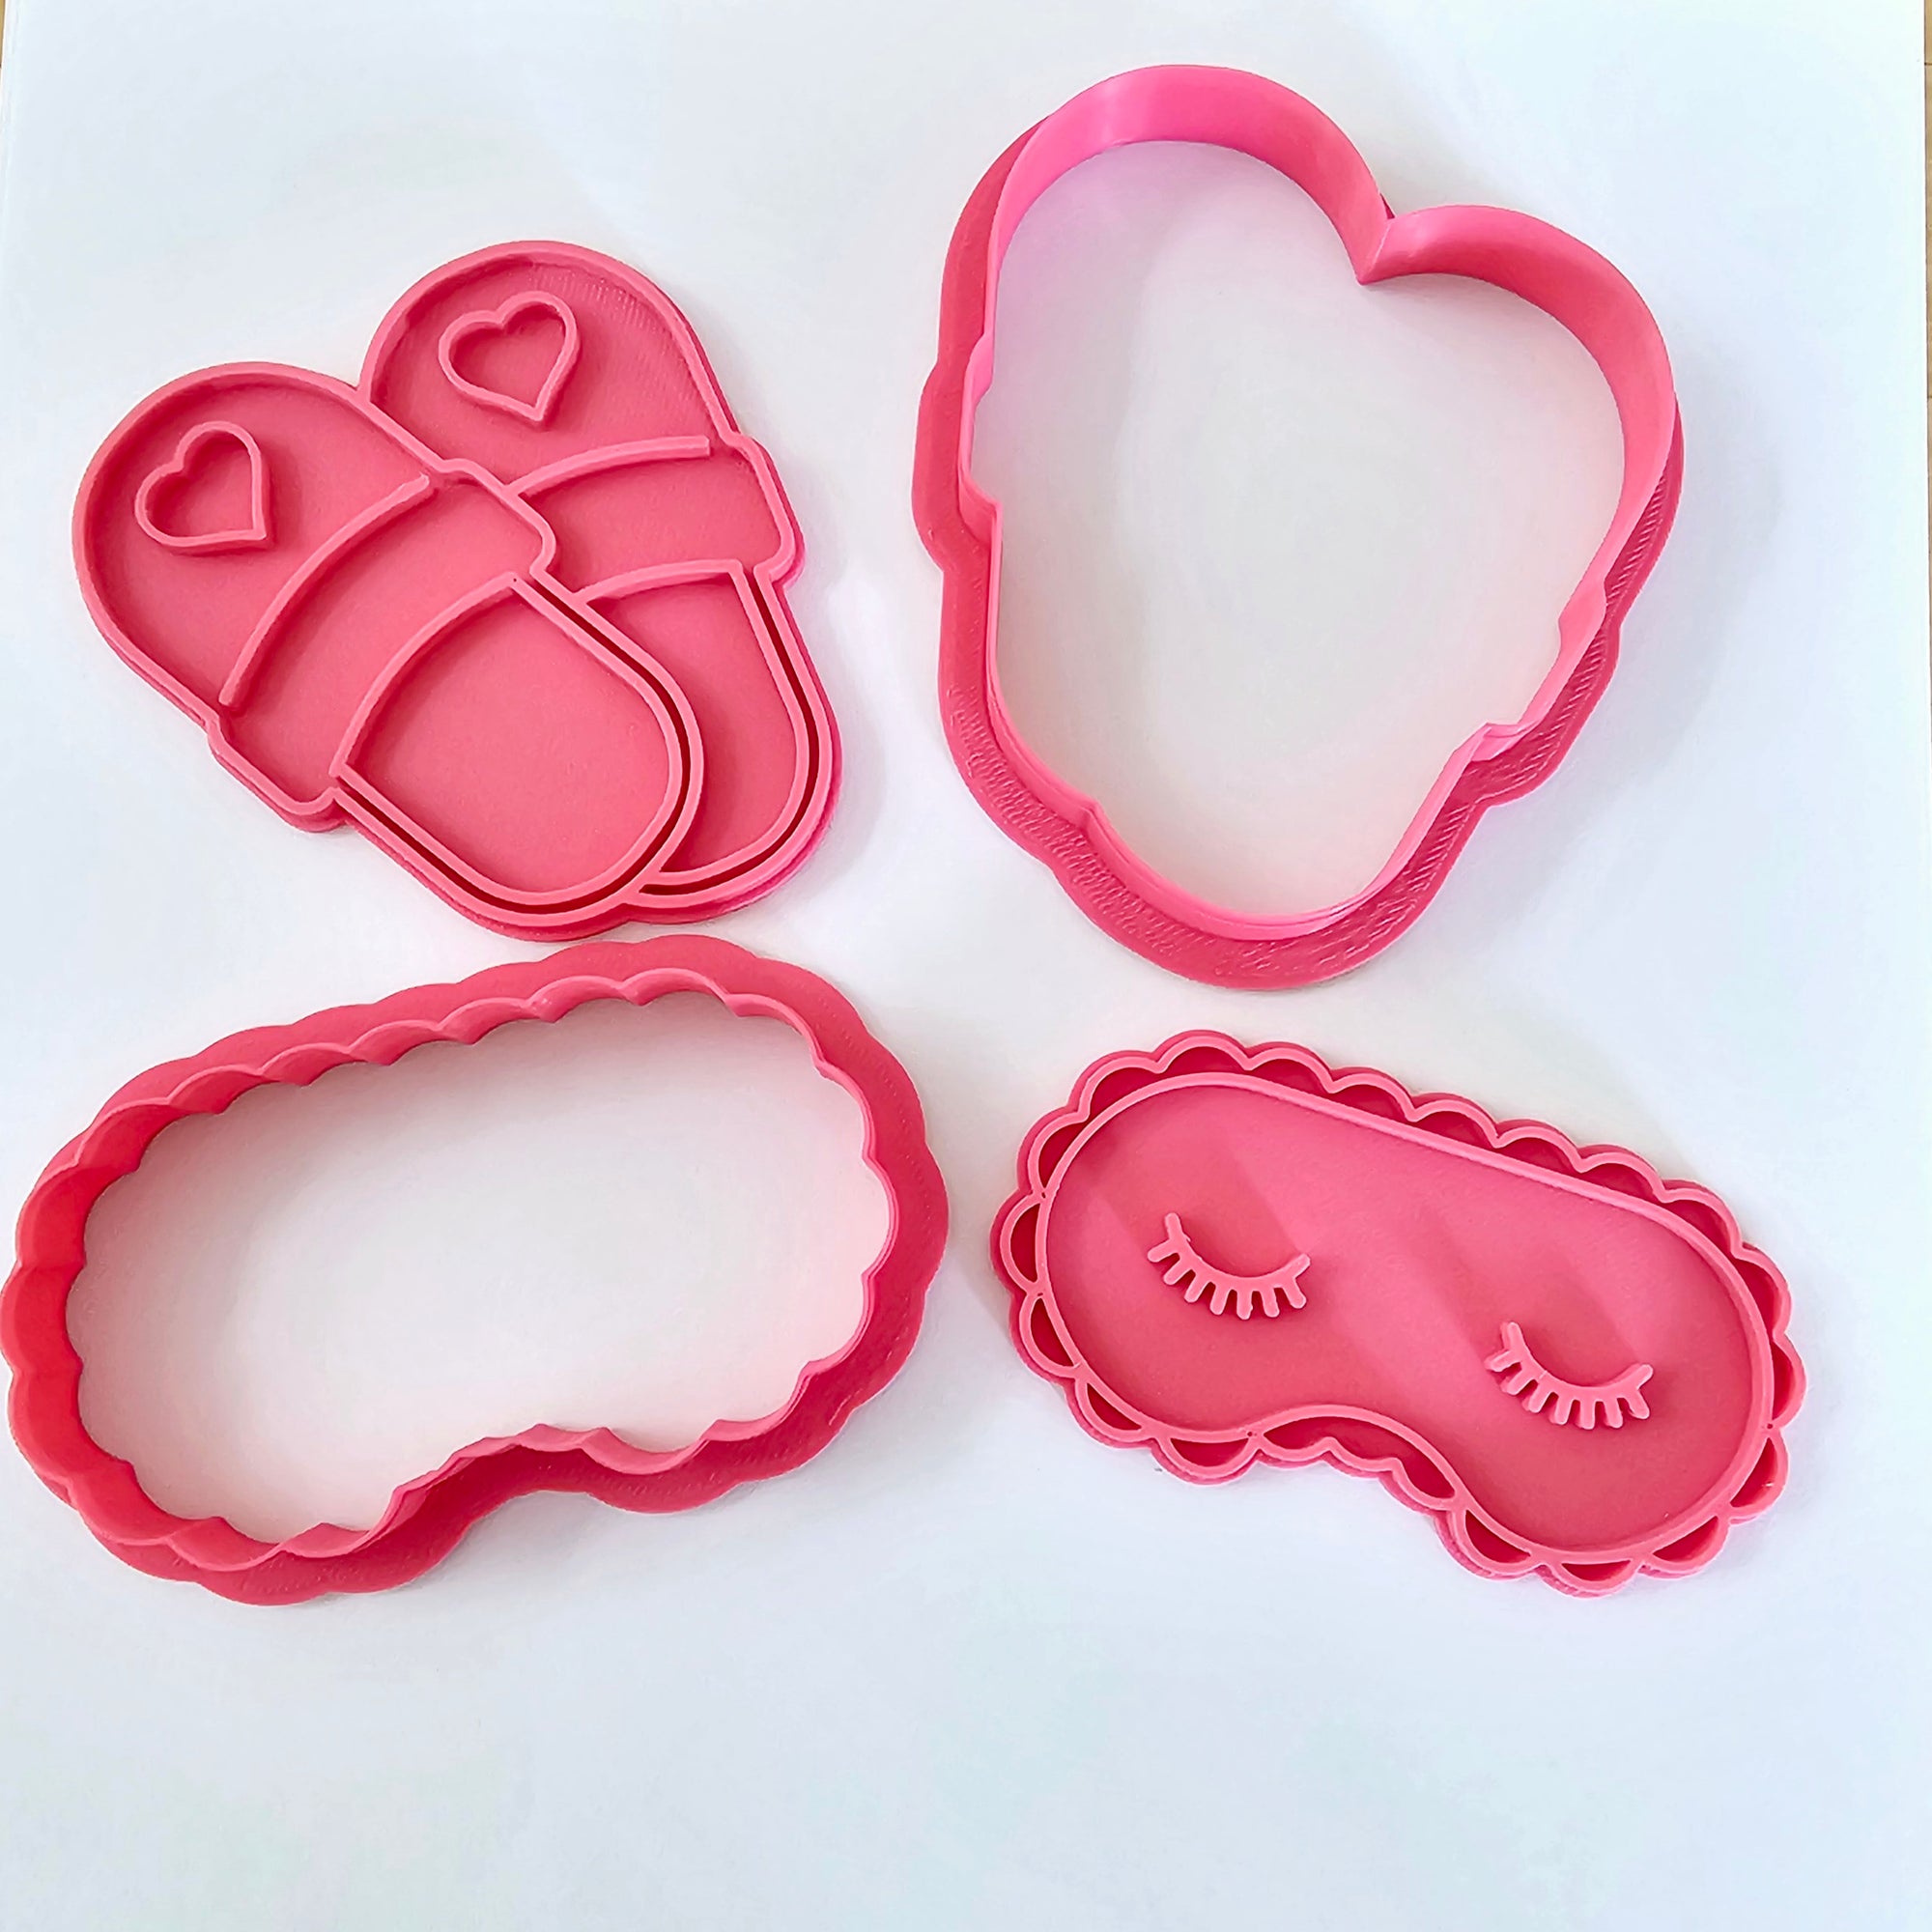 Eyemask & Slippers Cookie Cutter & Stamp Set